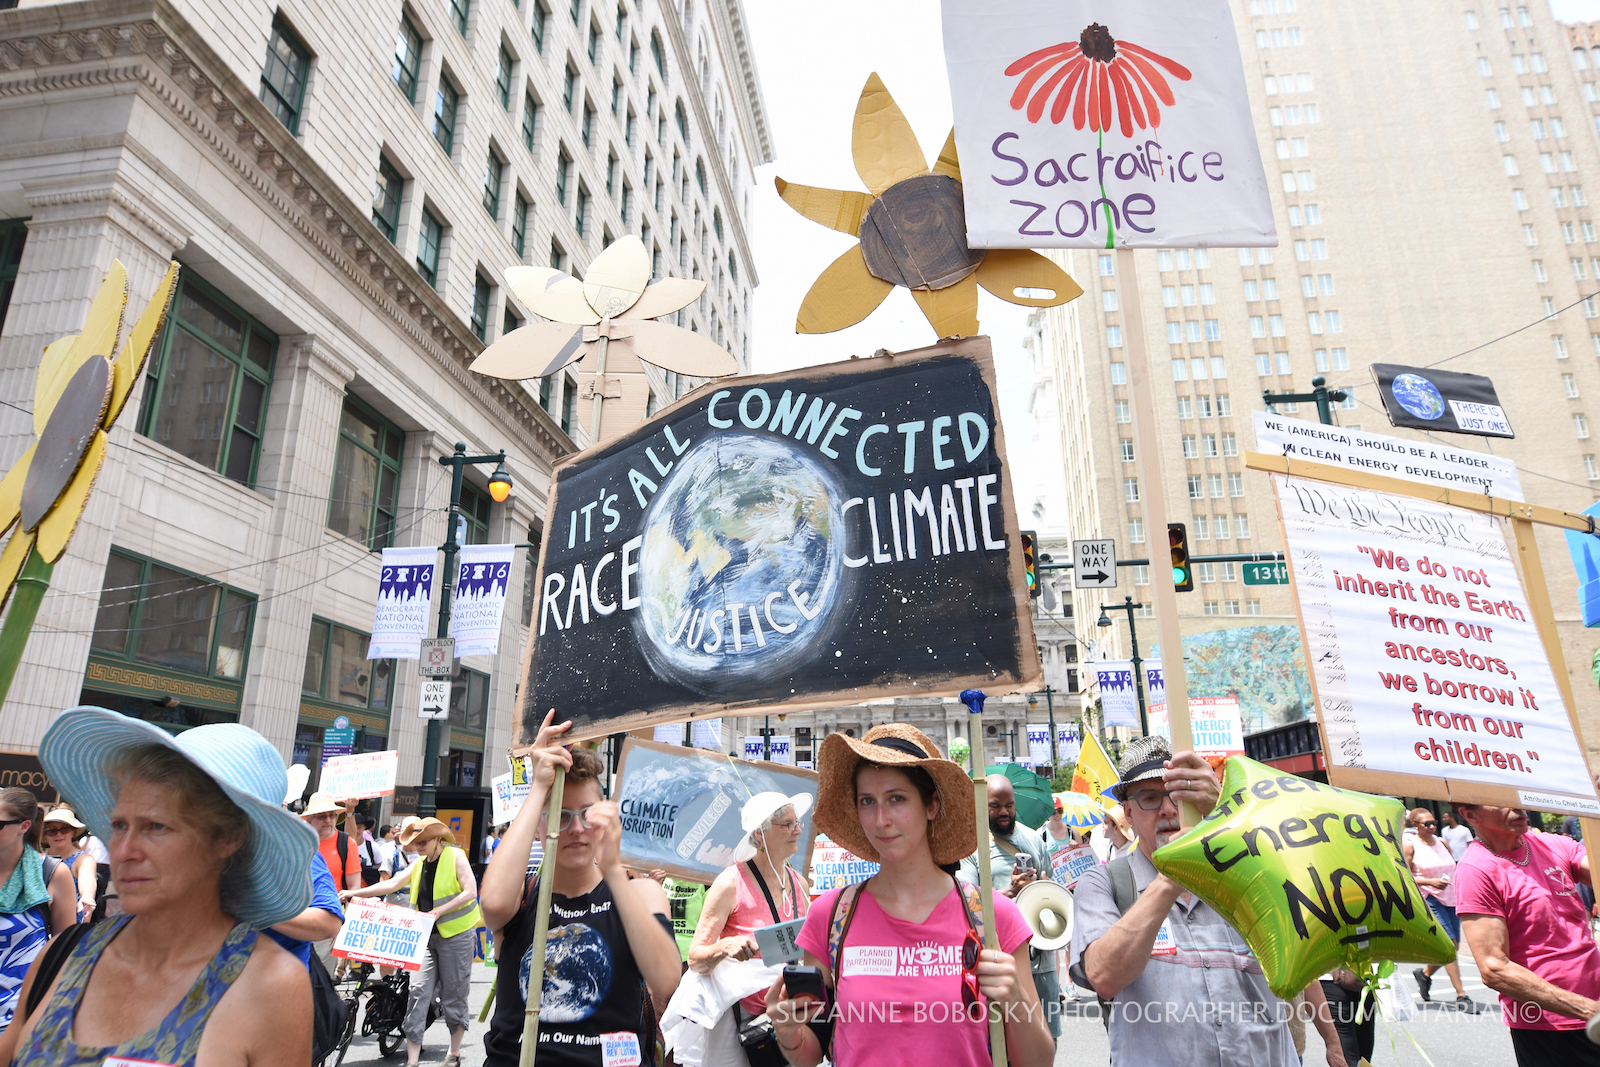 People marching at an anti-fracking protest in Philadelphia